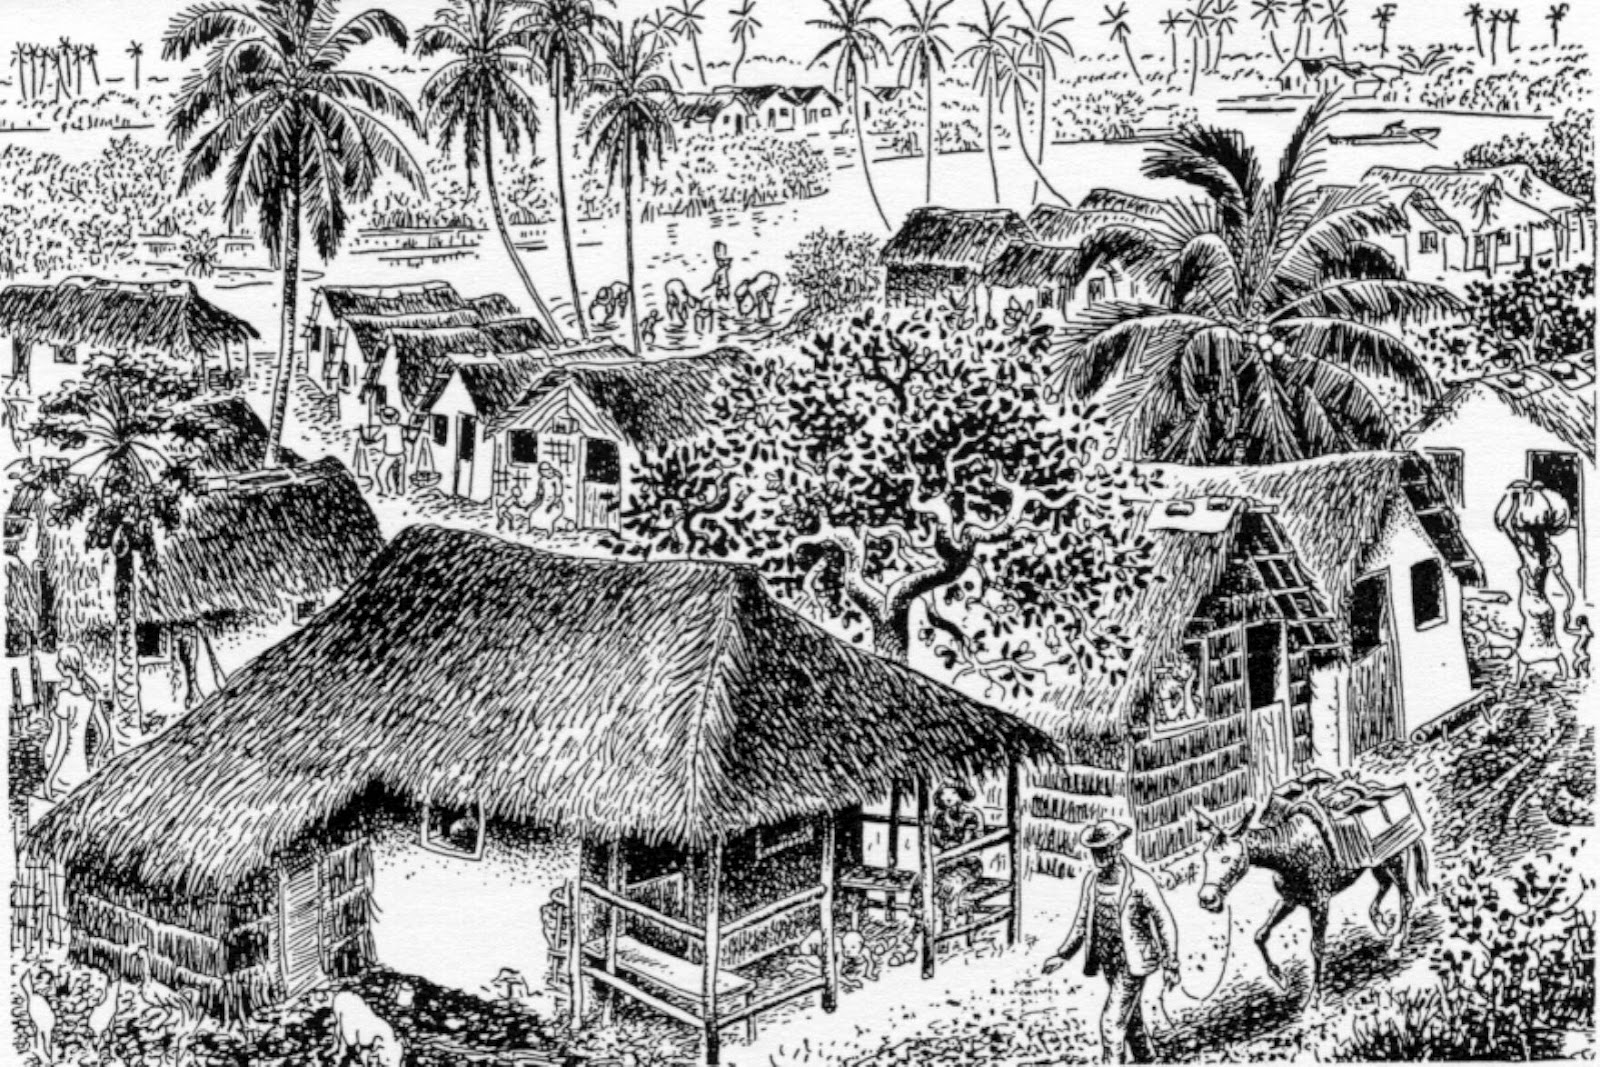 Picture of the Palmares Quilombo. The so-called Quilombos or Mocambos were the first experiences of freedom for Blacks in Brazil's colonial times.